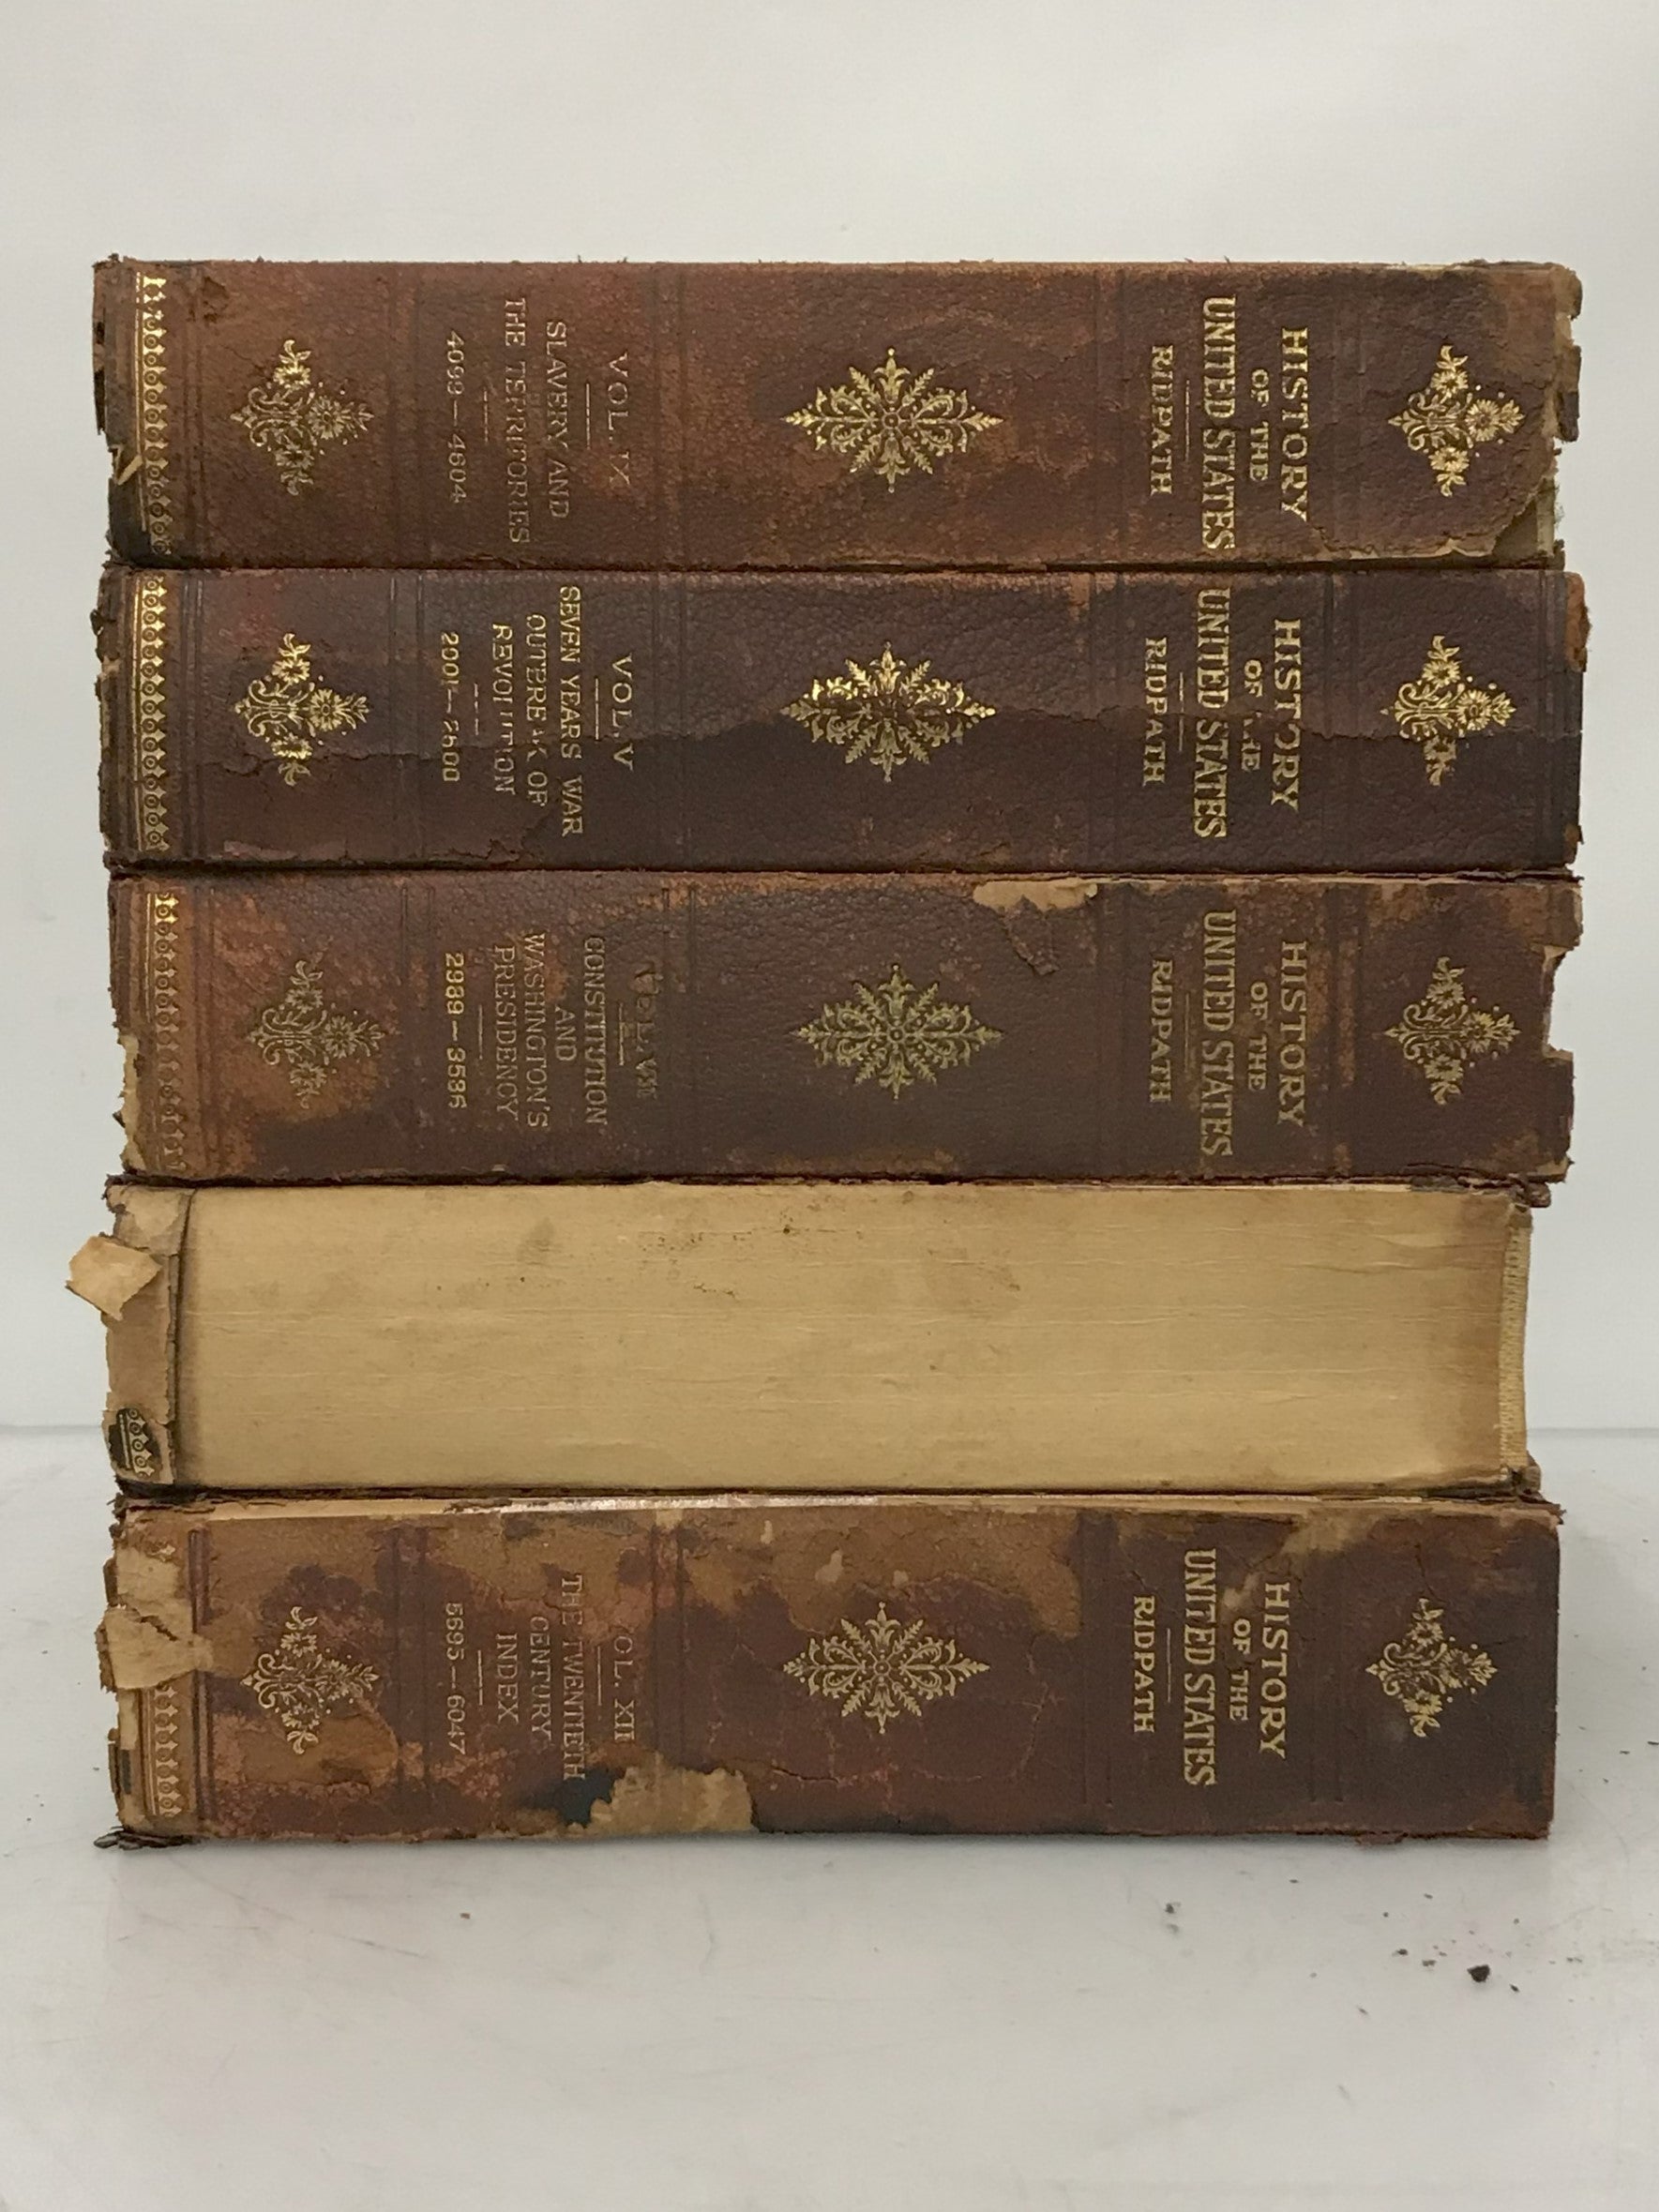 History of the United States by John Clark Ridpath 1914 Vols 5, 7, 9, 10, 12